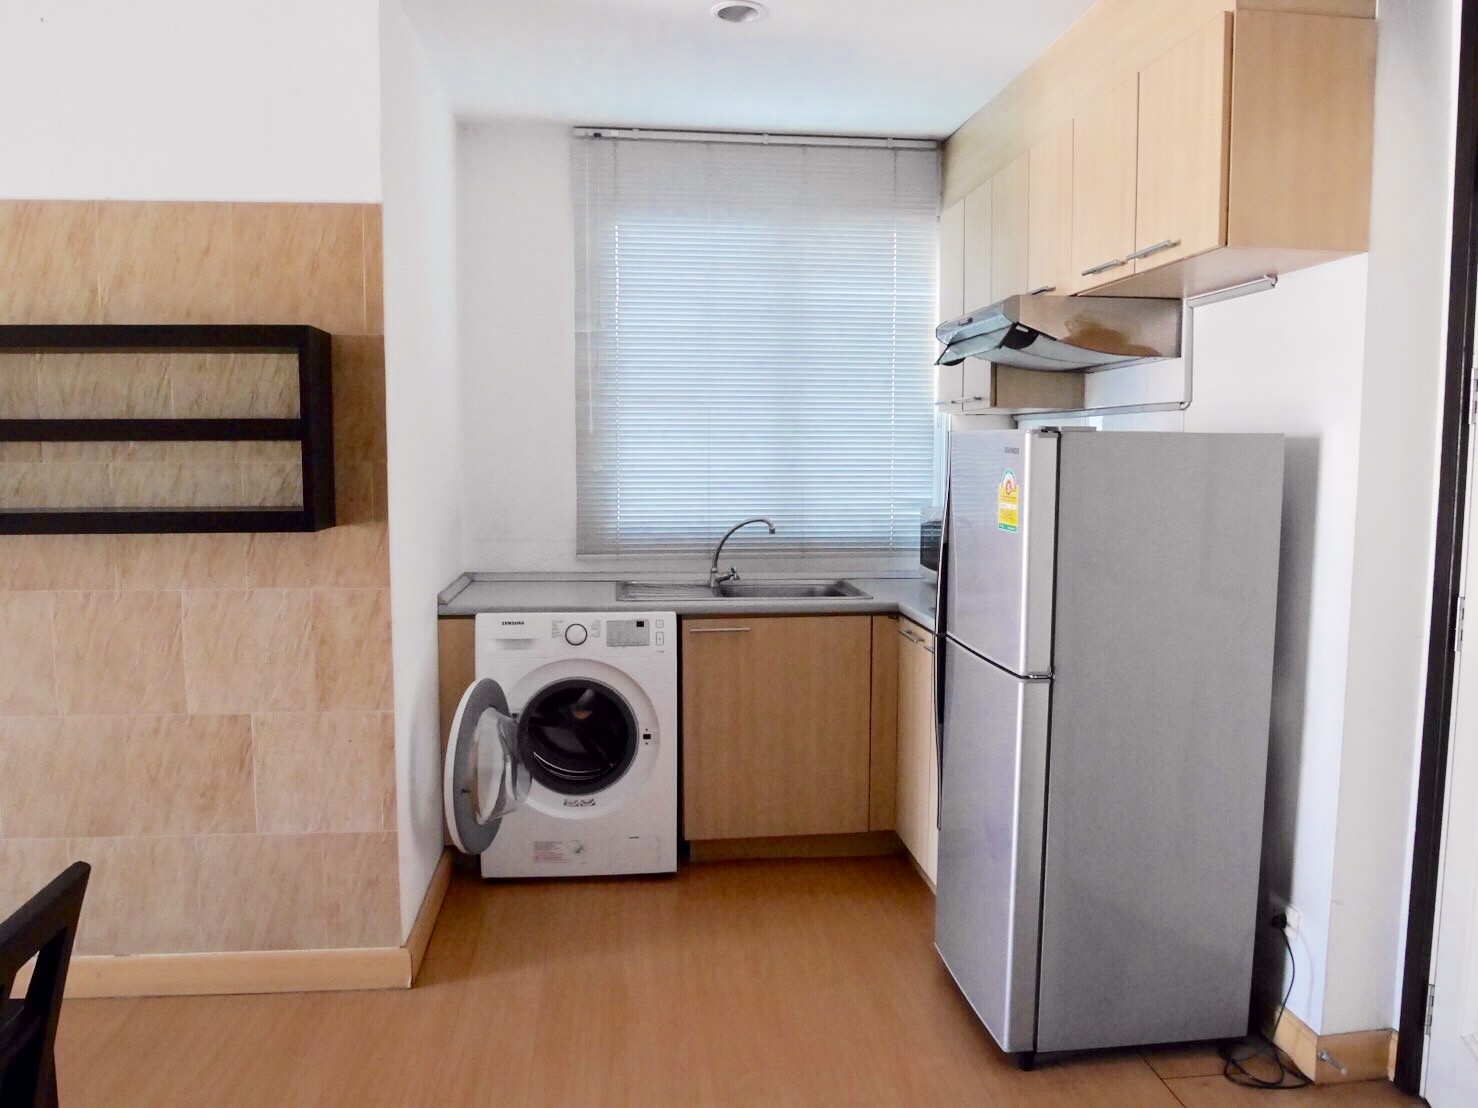 Condo for rent!! 1 bedroom 48 Sq.m Fully furnished, Ready to move in.